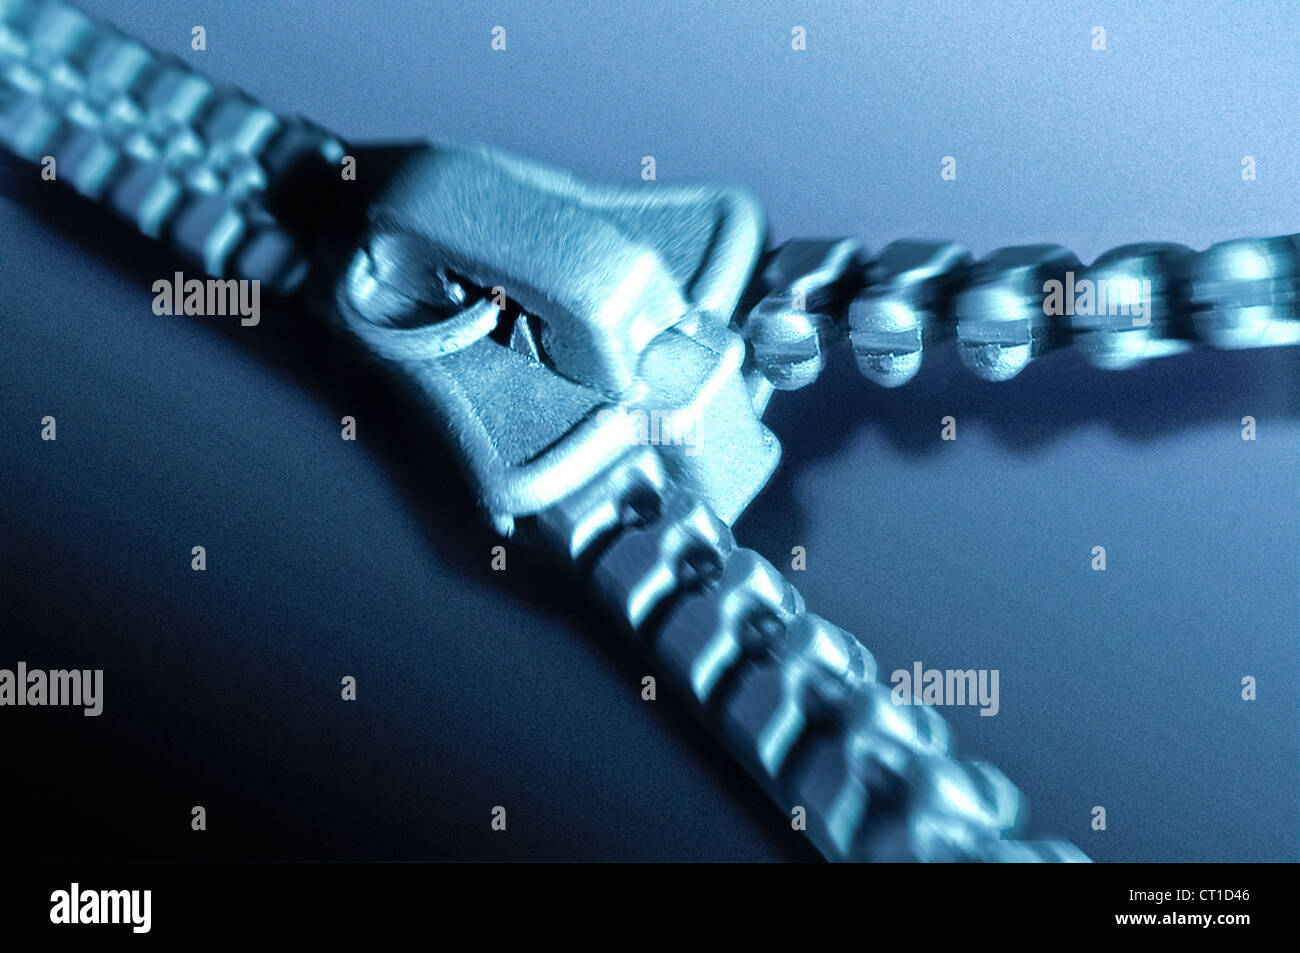 zipper half closed as a synonym for integration Stock Photo